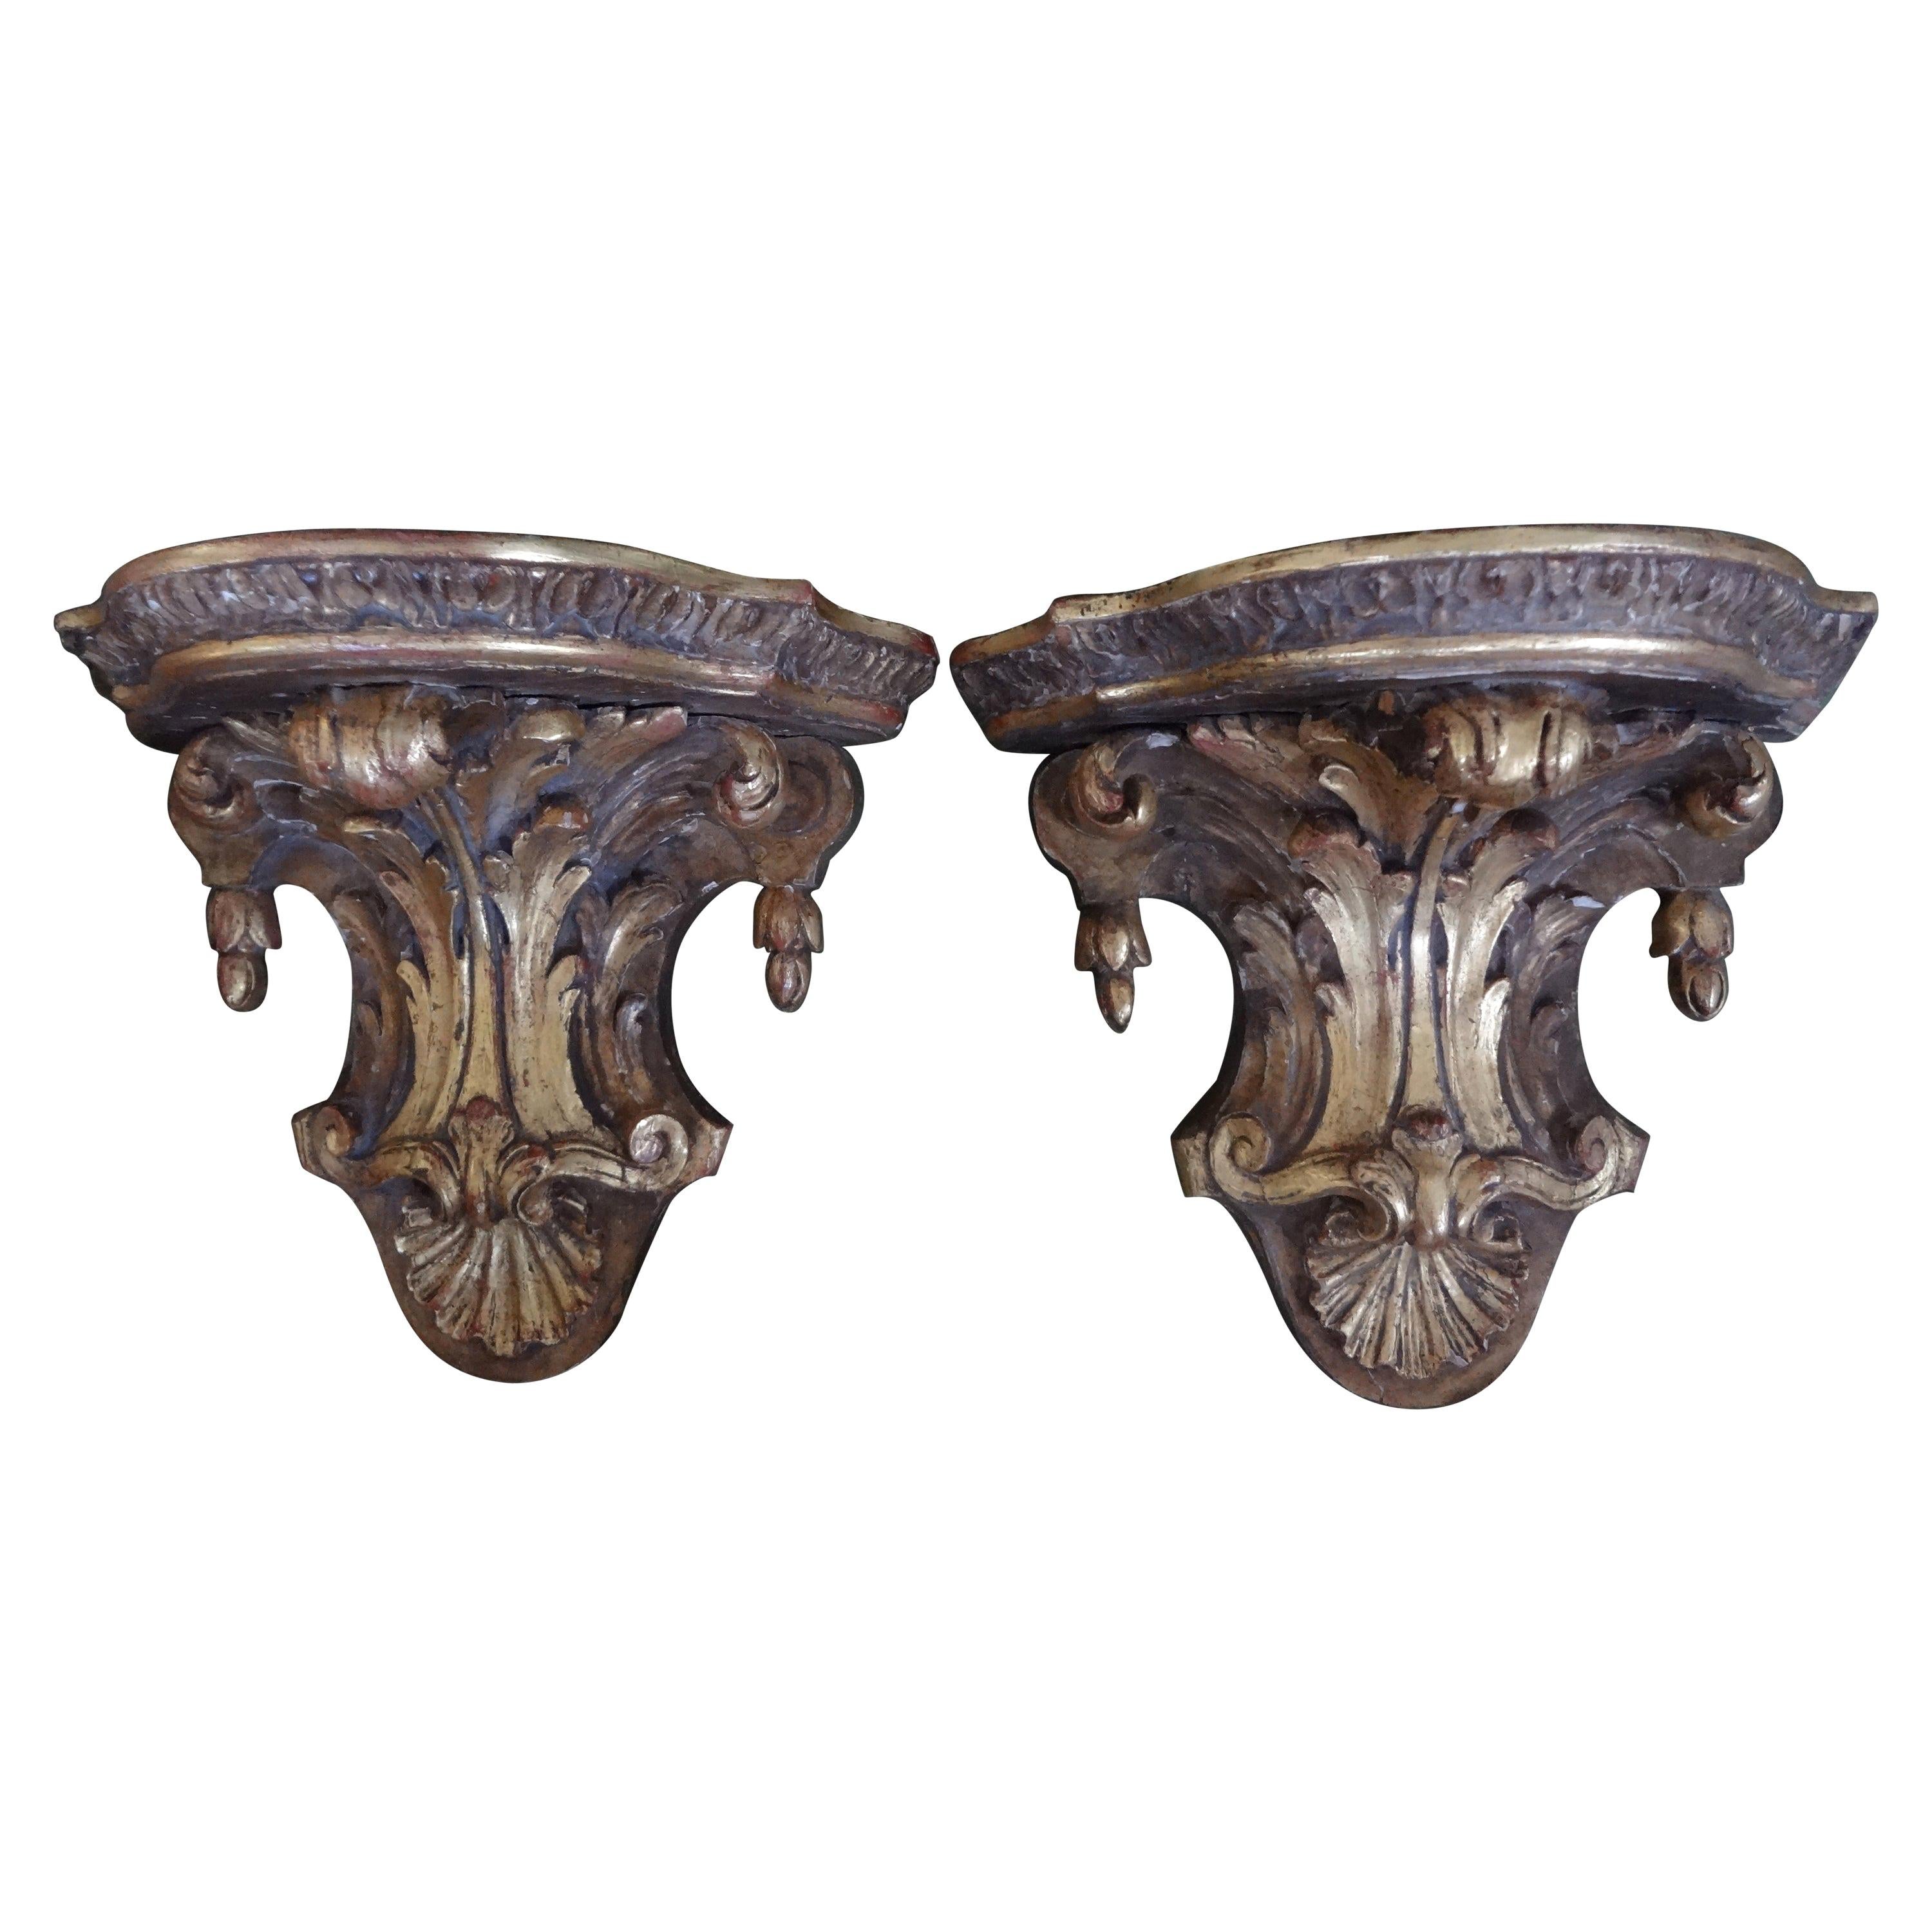 Stunning pair of 19th century or earlier Italian or French Regence style giltwood wall brackets. This pair of gilt wood wall brackets are in great shape with fabulous patina to the gilt. Extra large top surface area (15.13